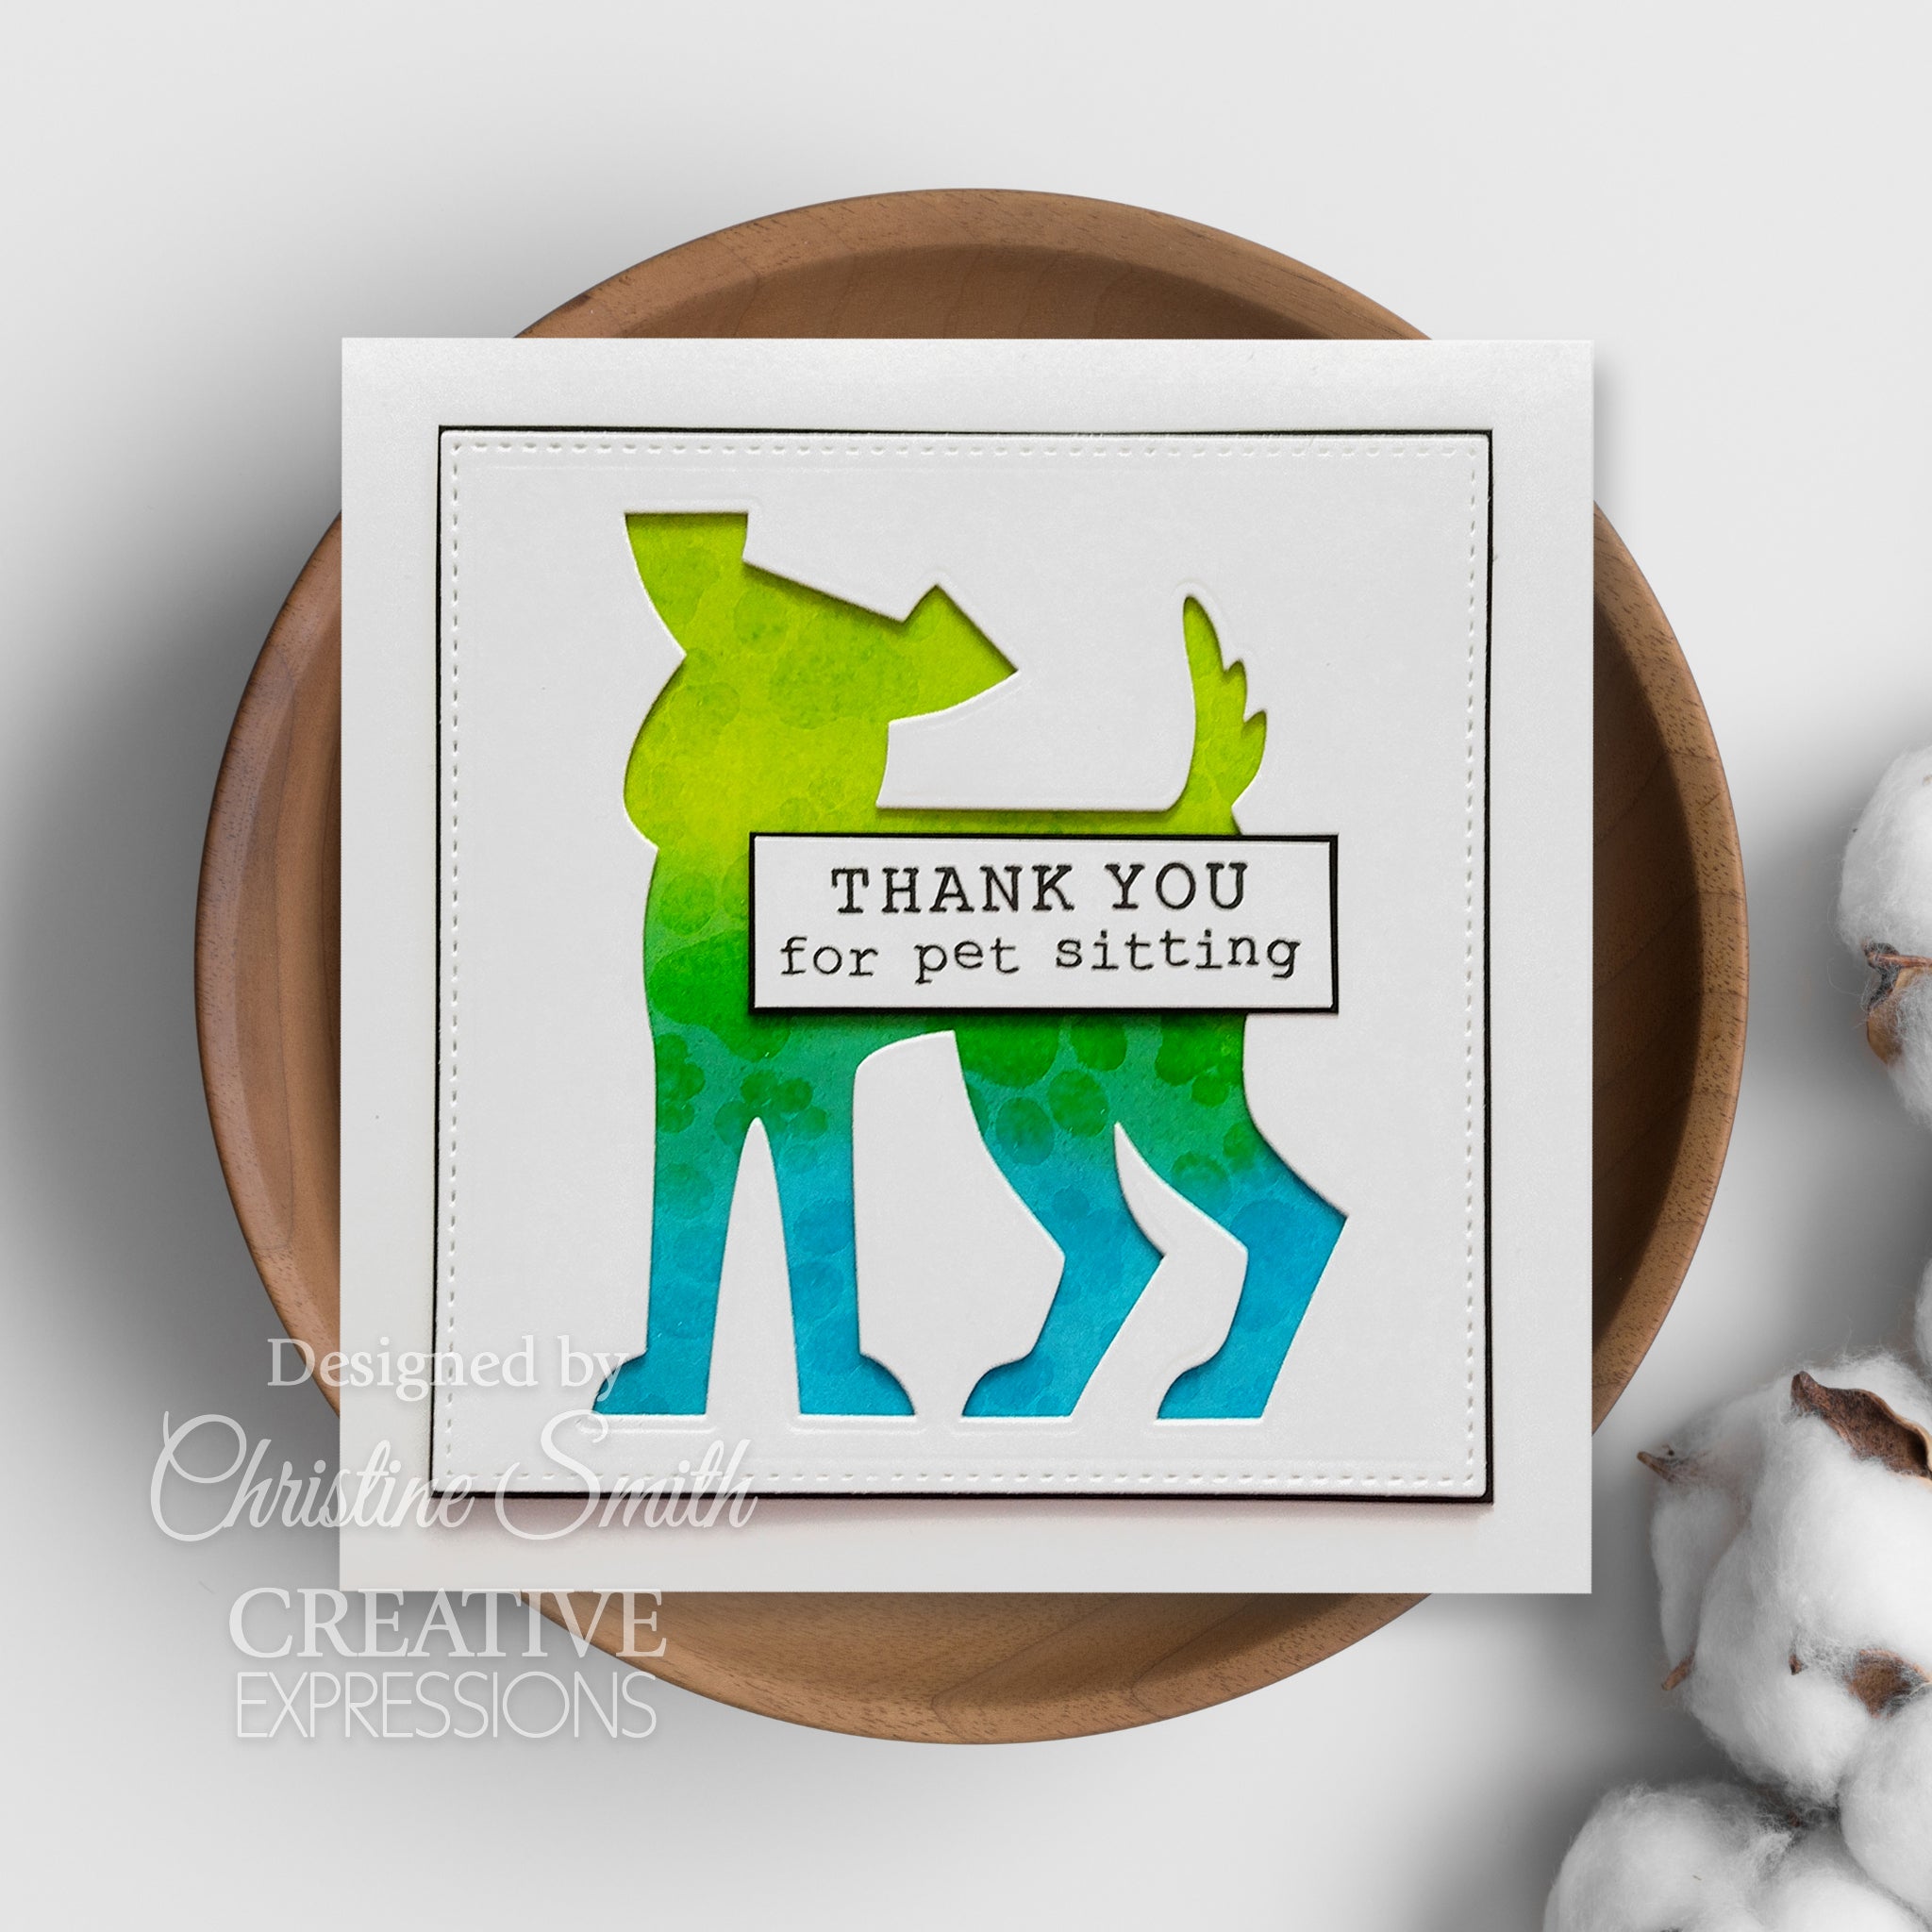 Creative Expressions Sue Wilson Pet Pals  4 x 6 in Clear Stamp Set